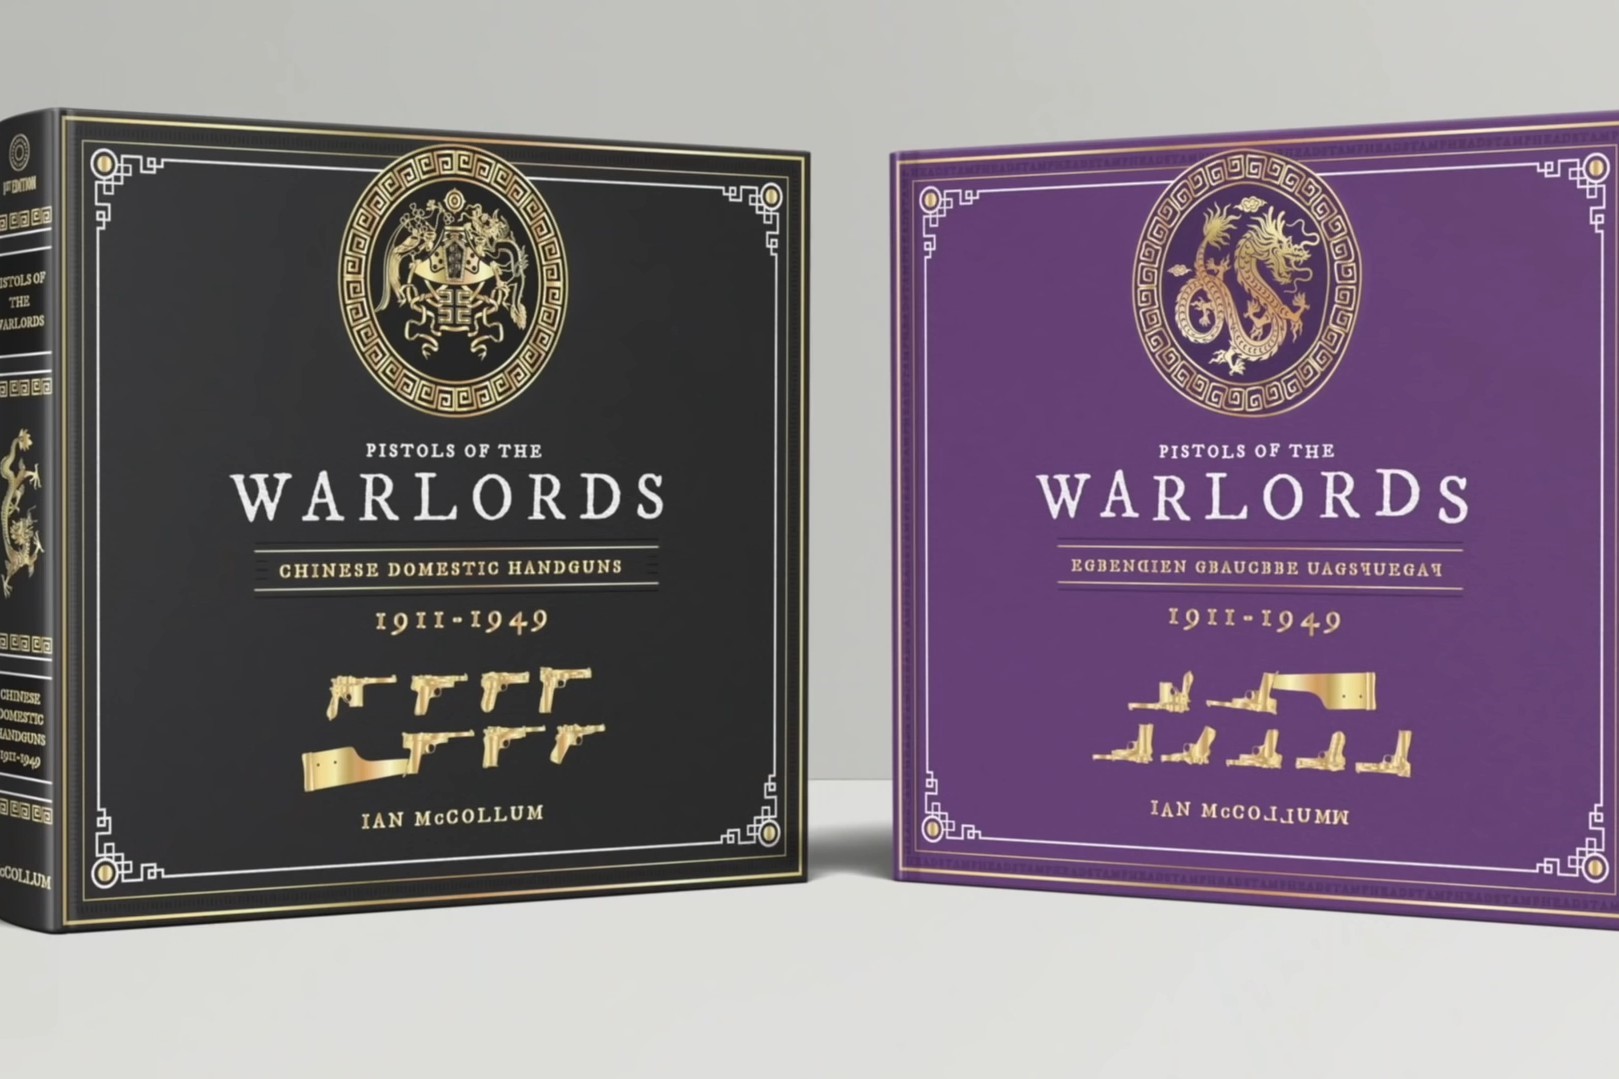 Pistols of the Warlords book by Ian Mcallum